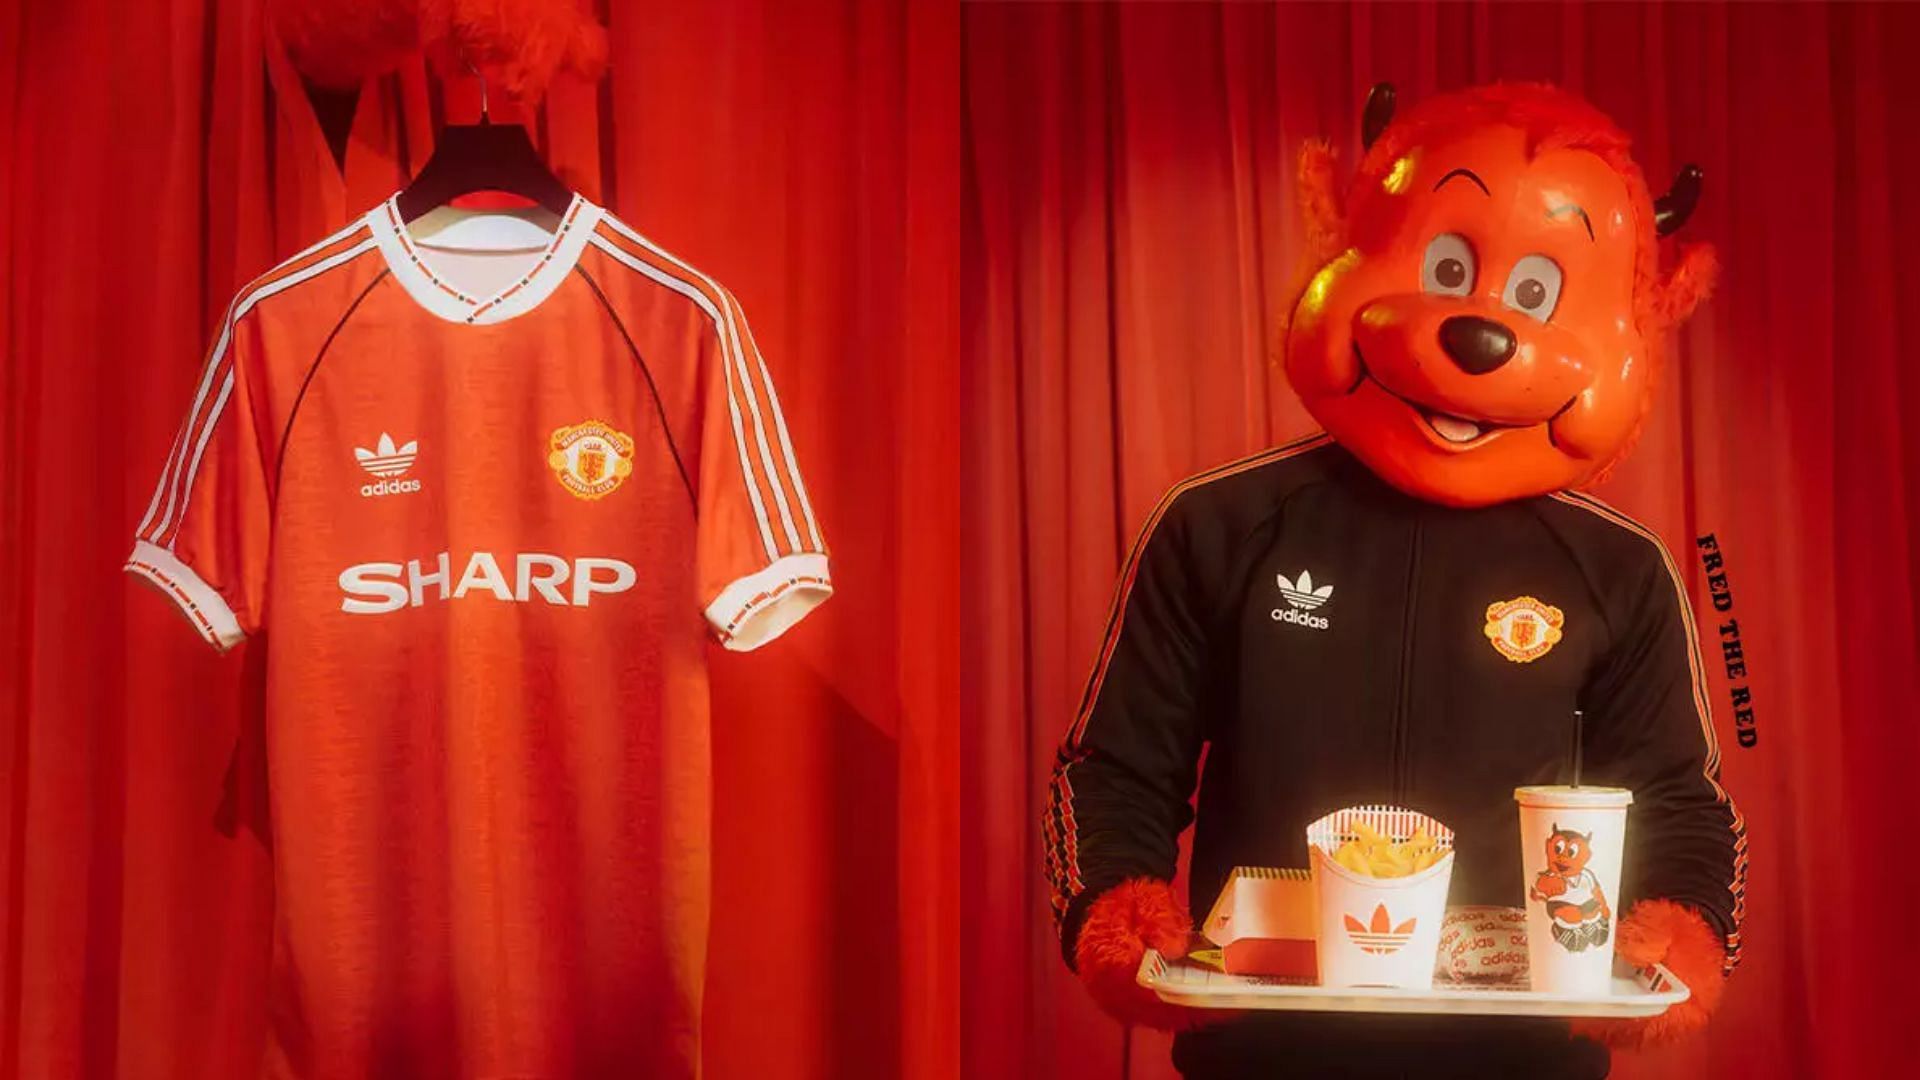 Manchester United X Adidas Originals featuring United 90 home jersey and track top (Image via Adidas)